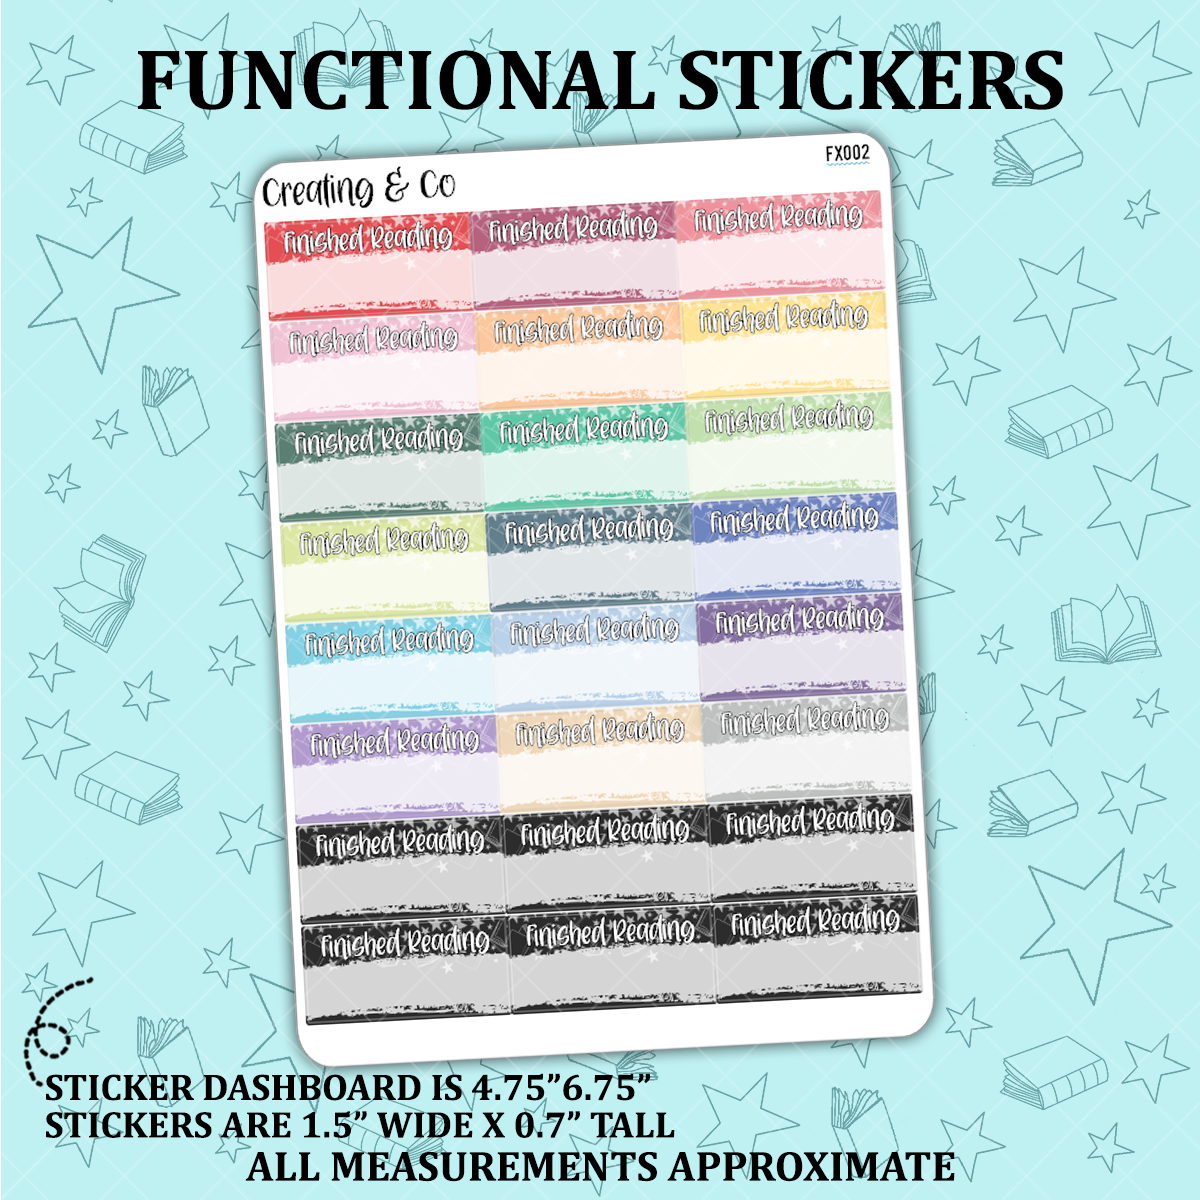 Finished Reading Functional Sticker Sheet - FX002